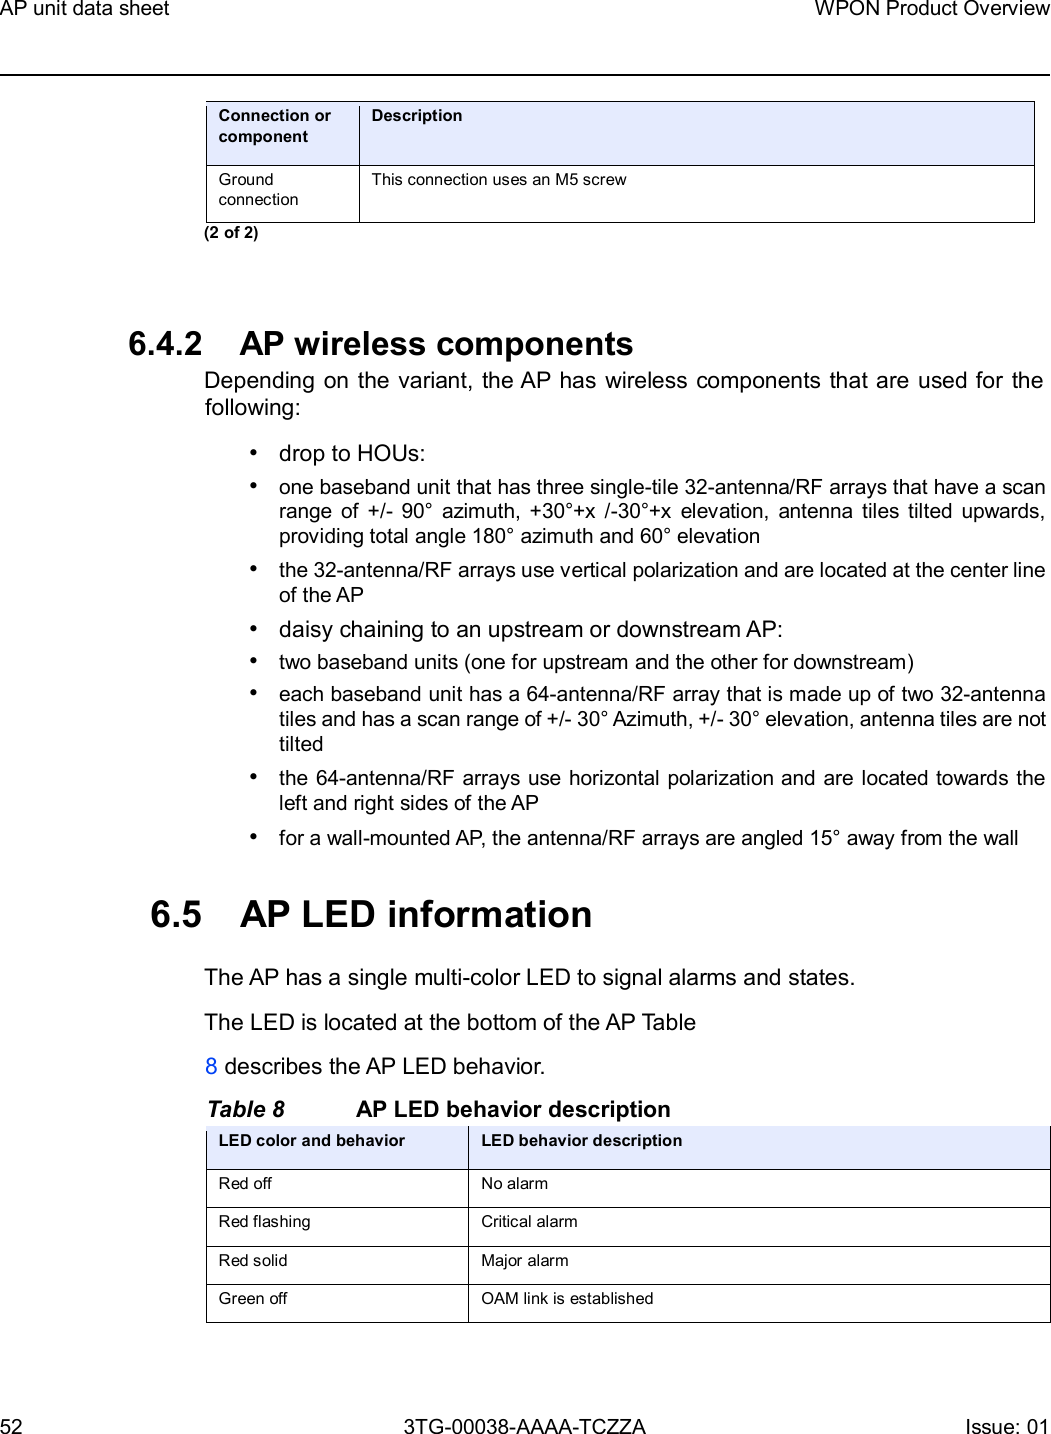 Page 52 of Nokia Bell 7577WPONAPAC WPON User Manual WPON Product Overview